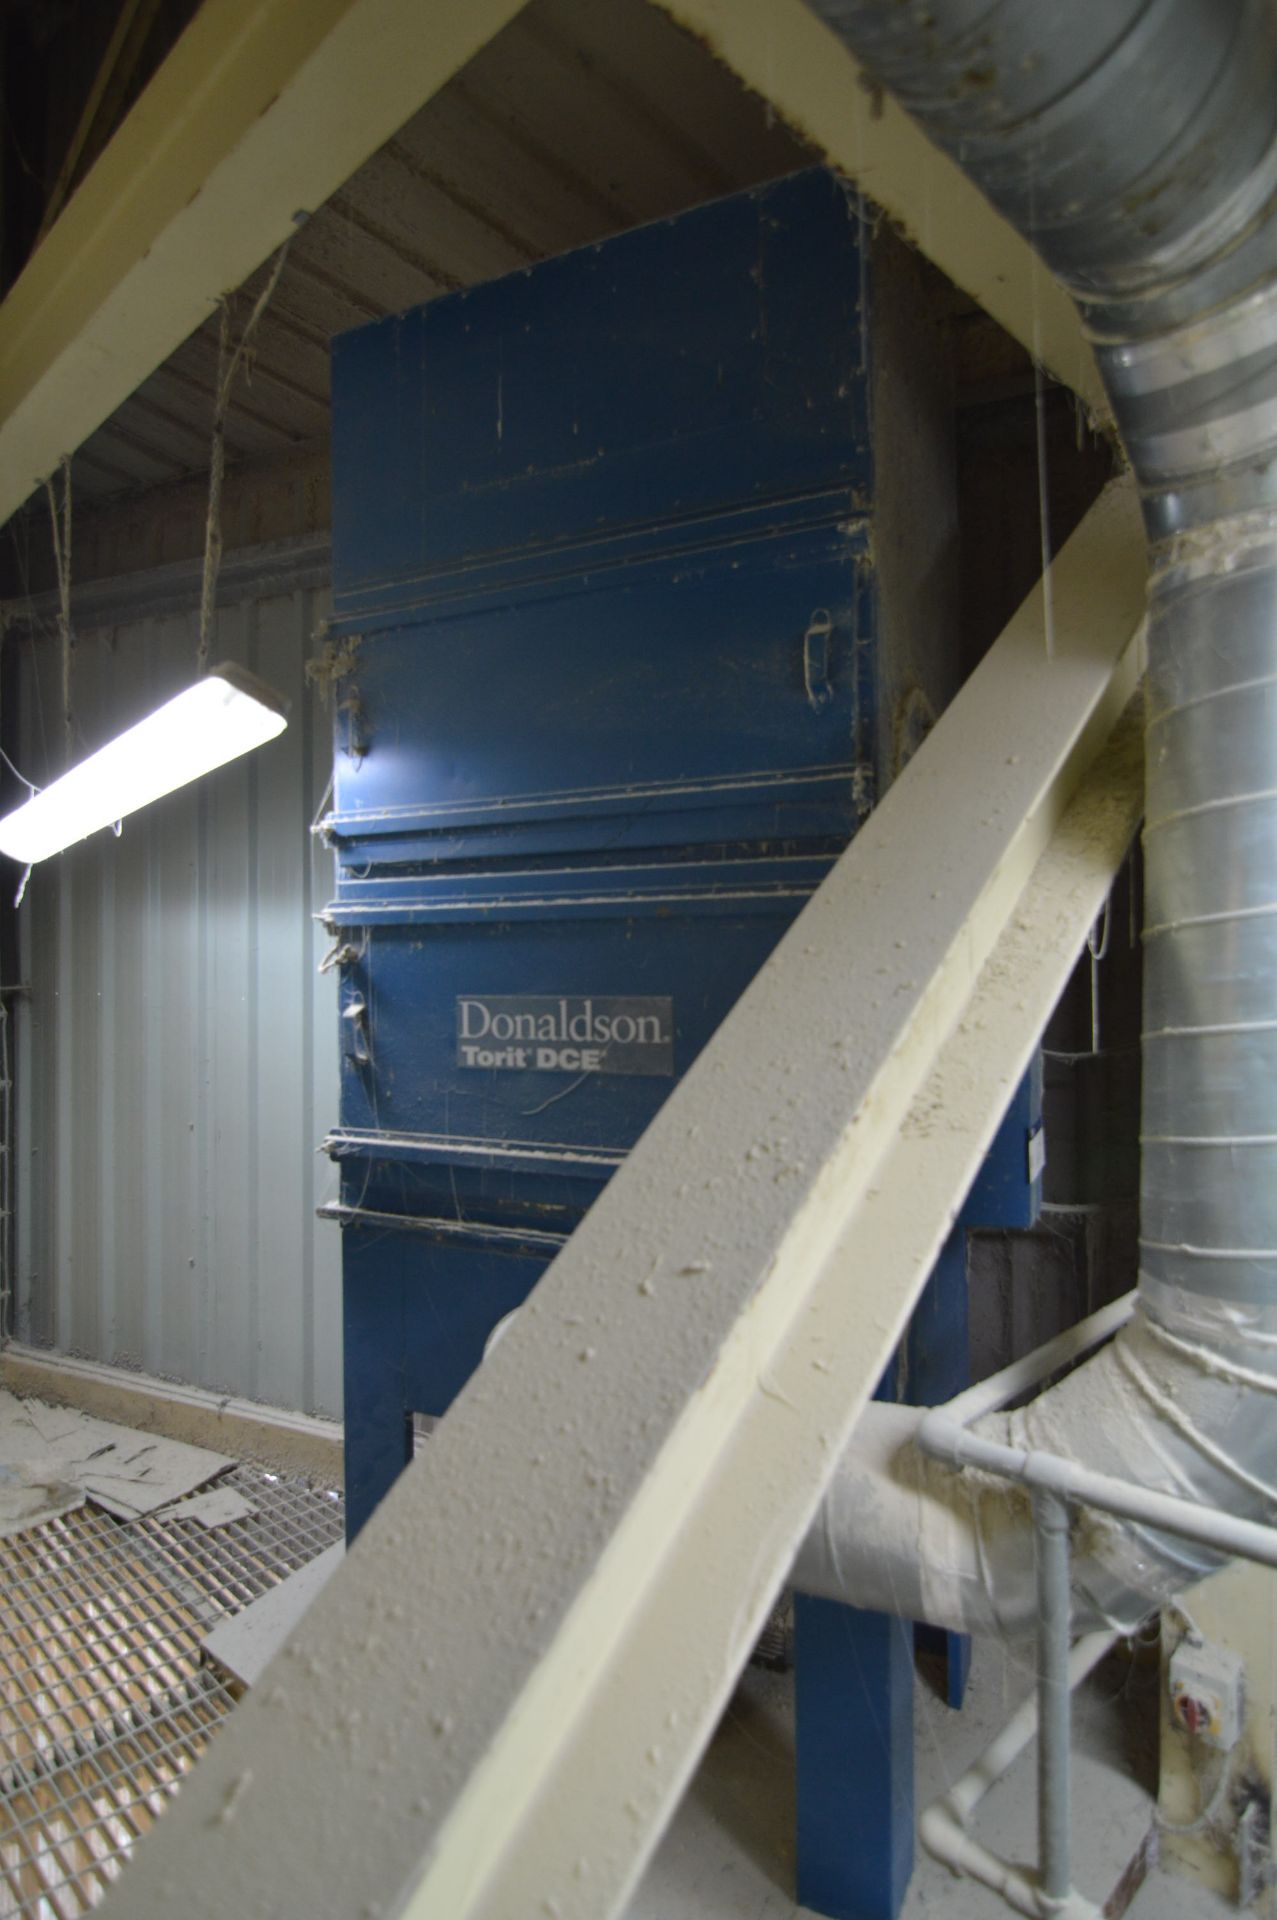 Donaldson Torit DCE UMA253K7 DUST COLLECTION UNIT, serial no. 000460143, year of manufacture 2012,